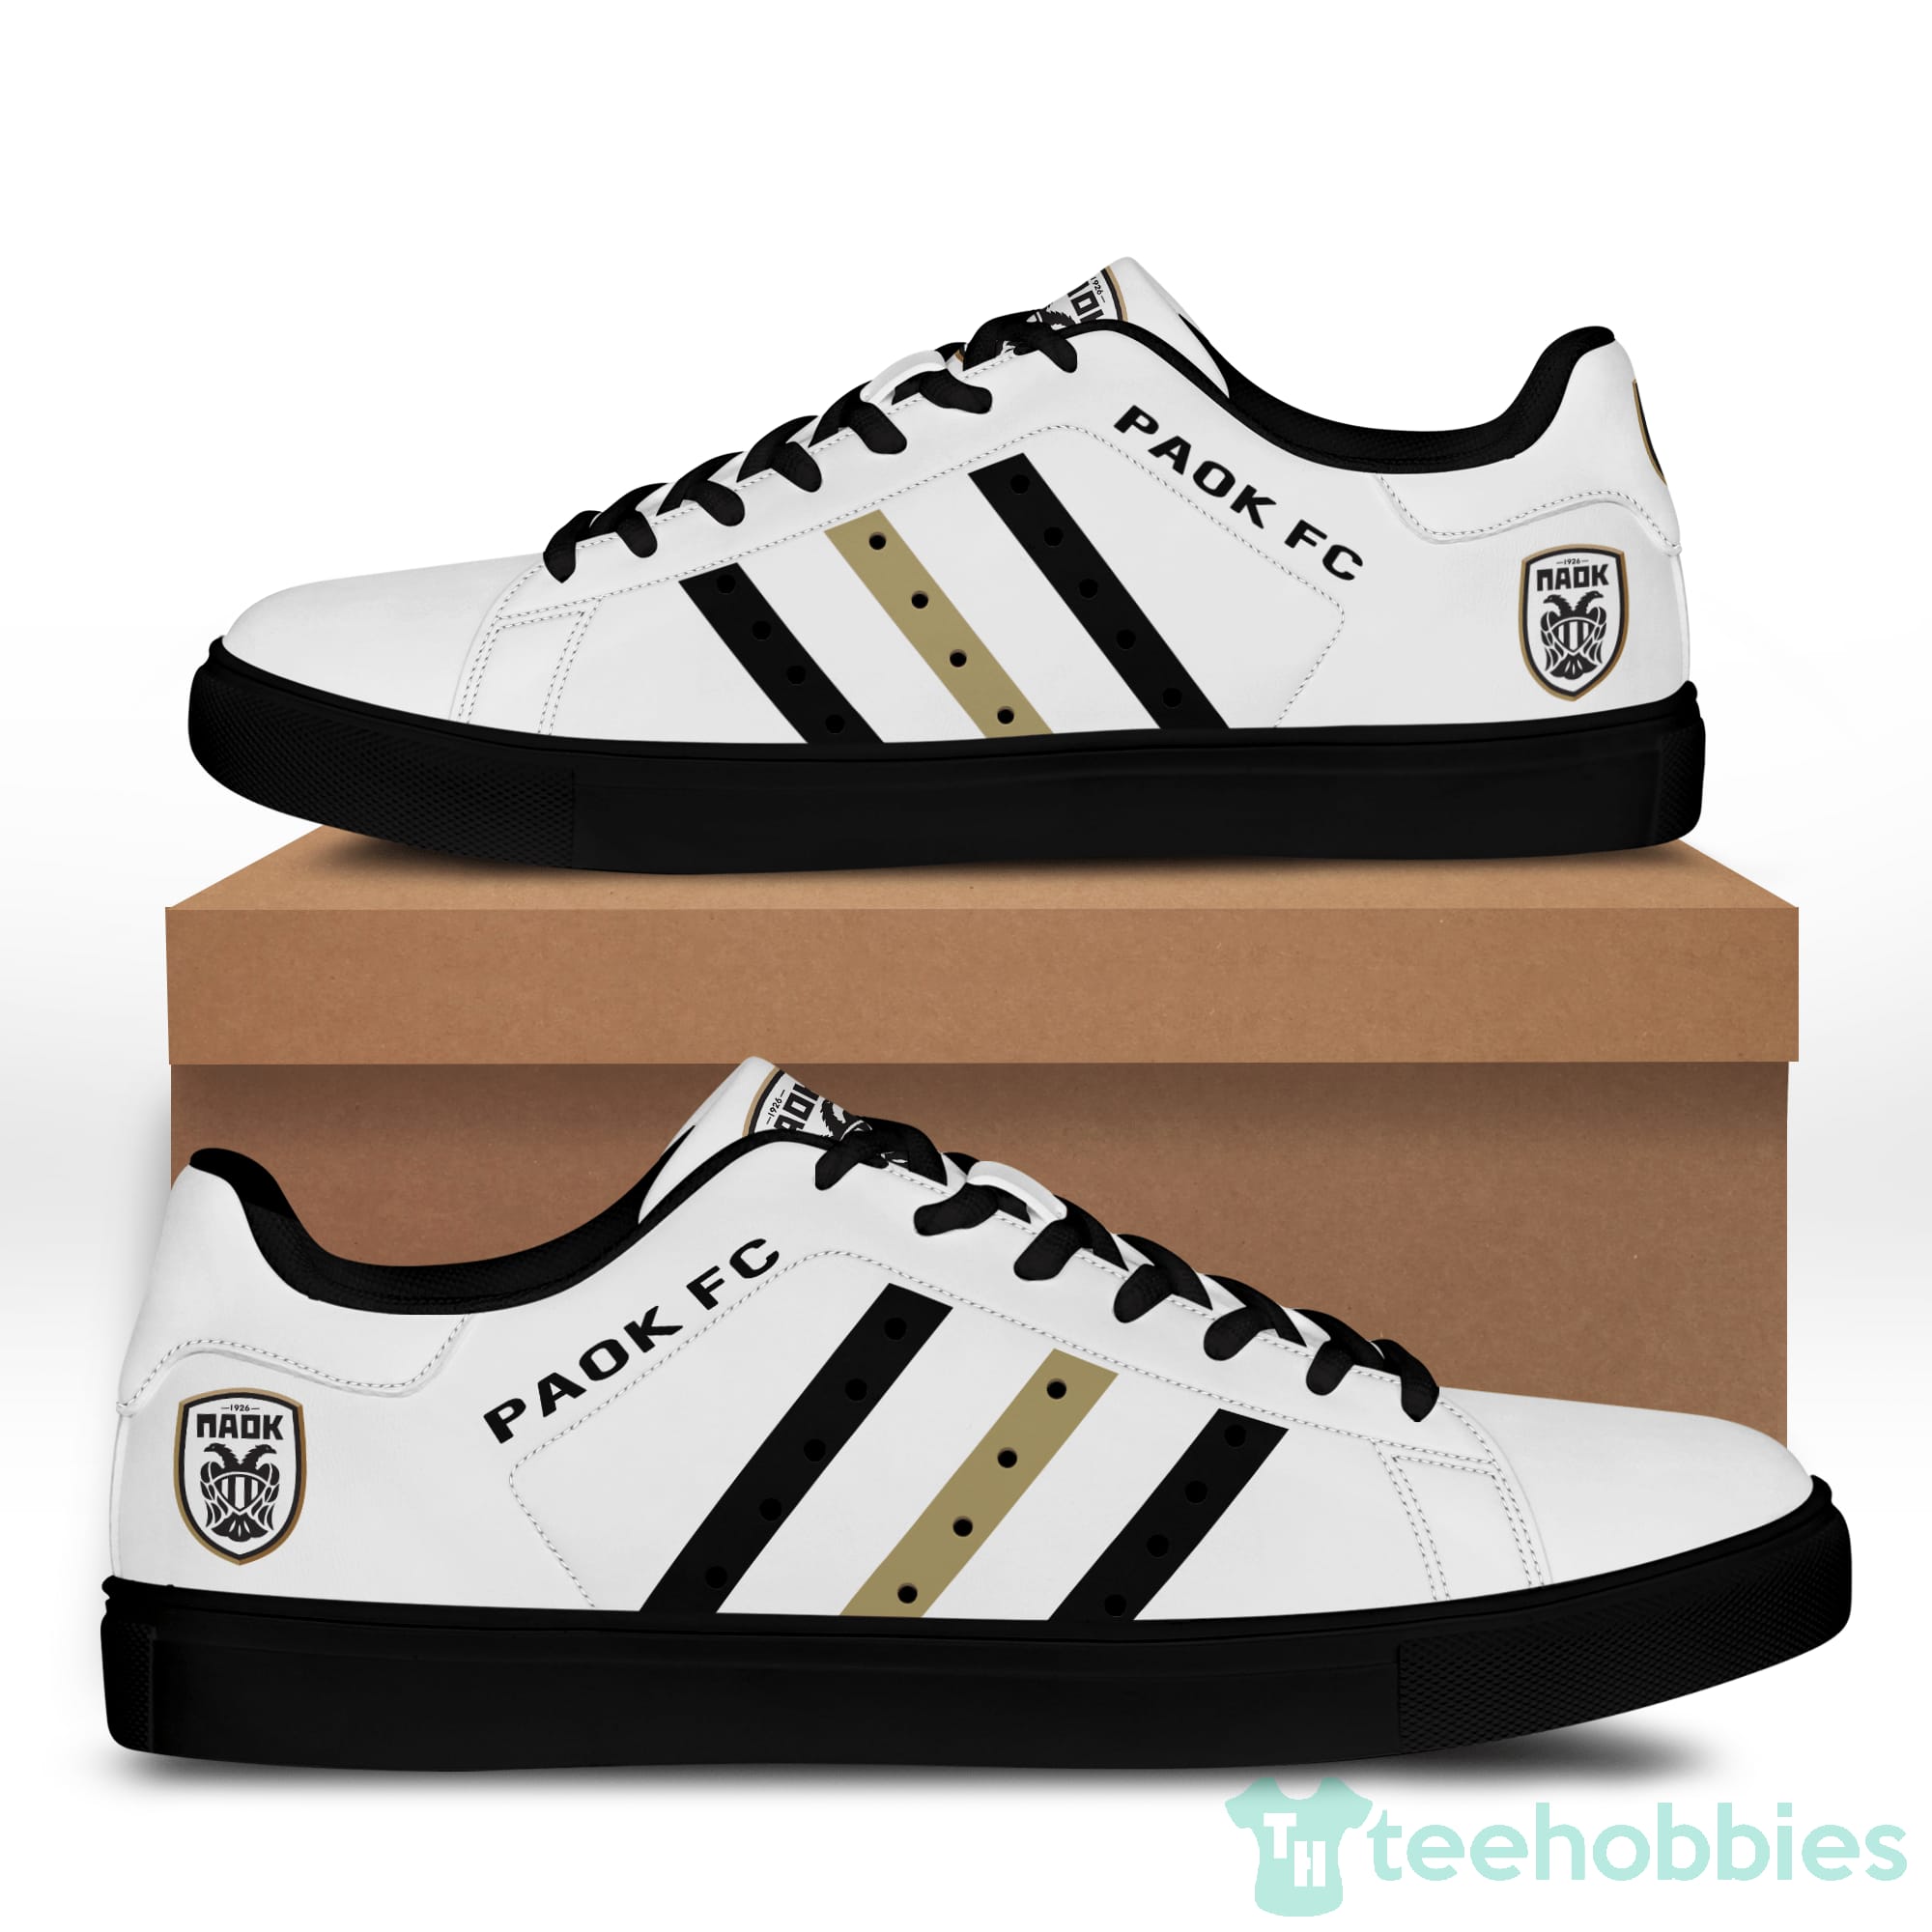 Paok Fc White Low Top Skate Shoes Product photo 2